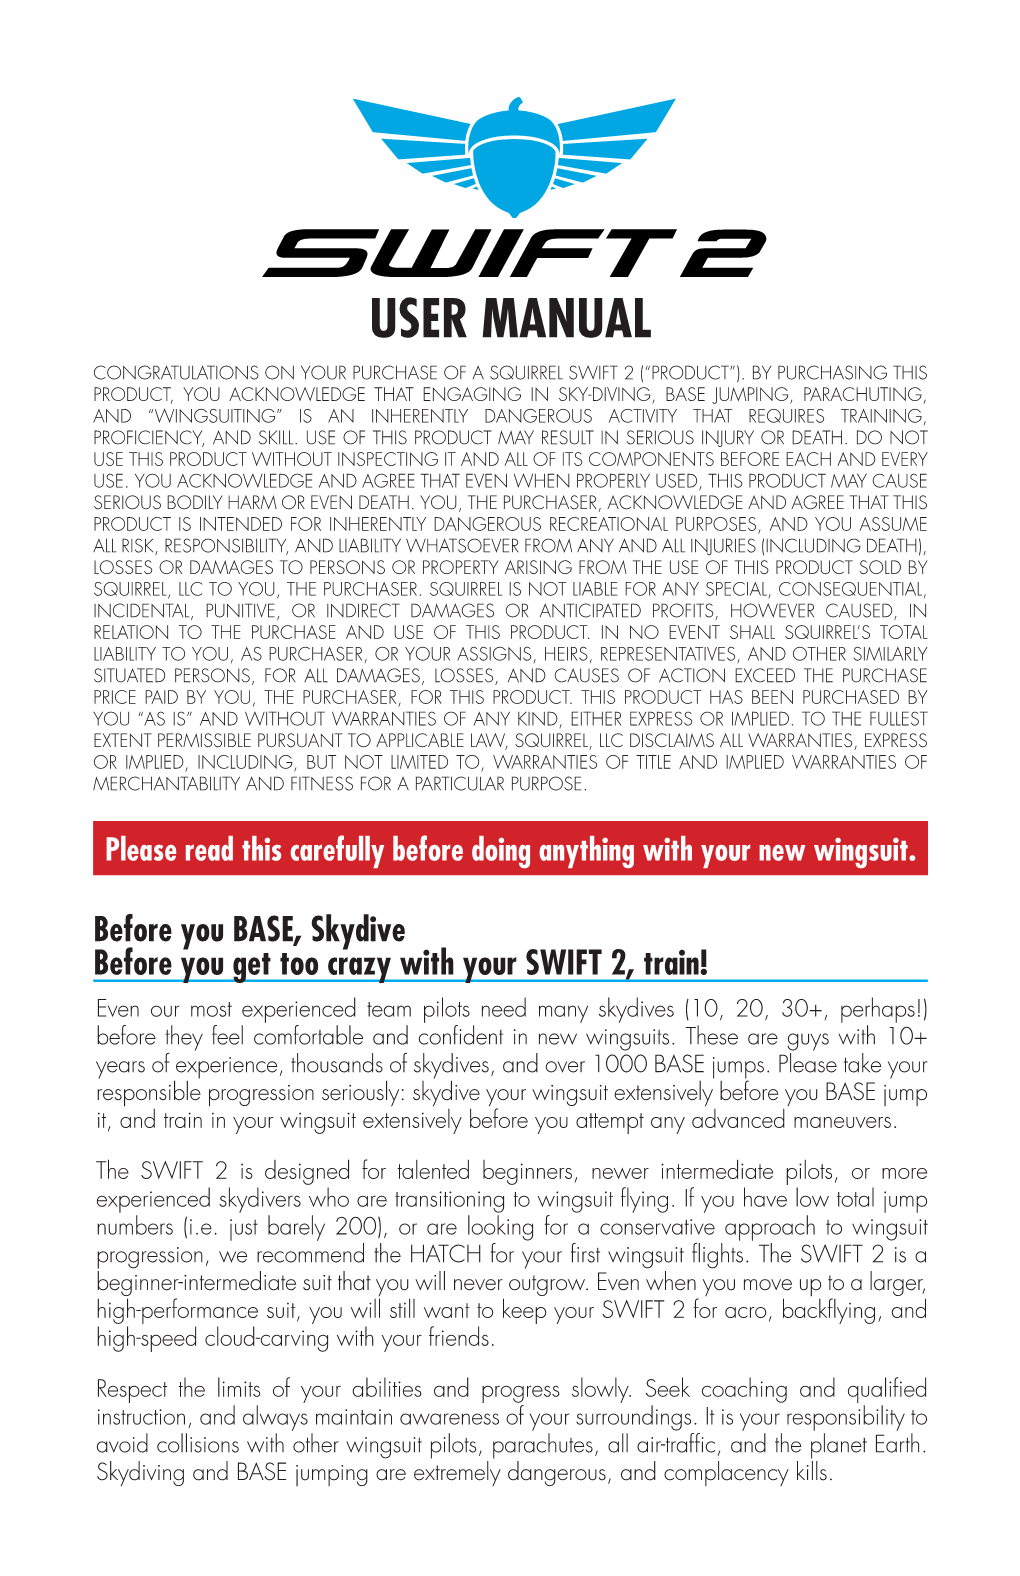 User Manual Congratulations on Your Purchase of a Squirrel Swift 2 (“Product”)